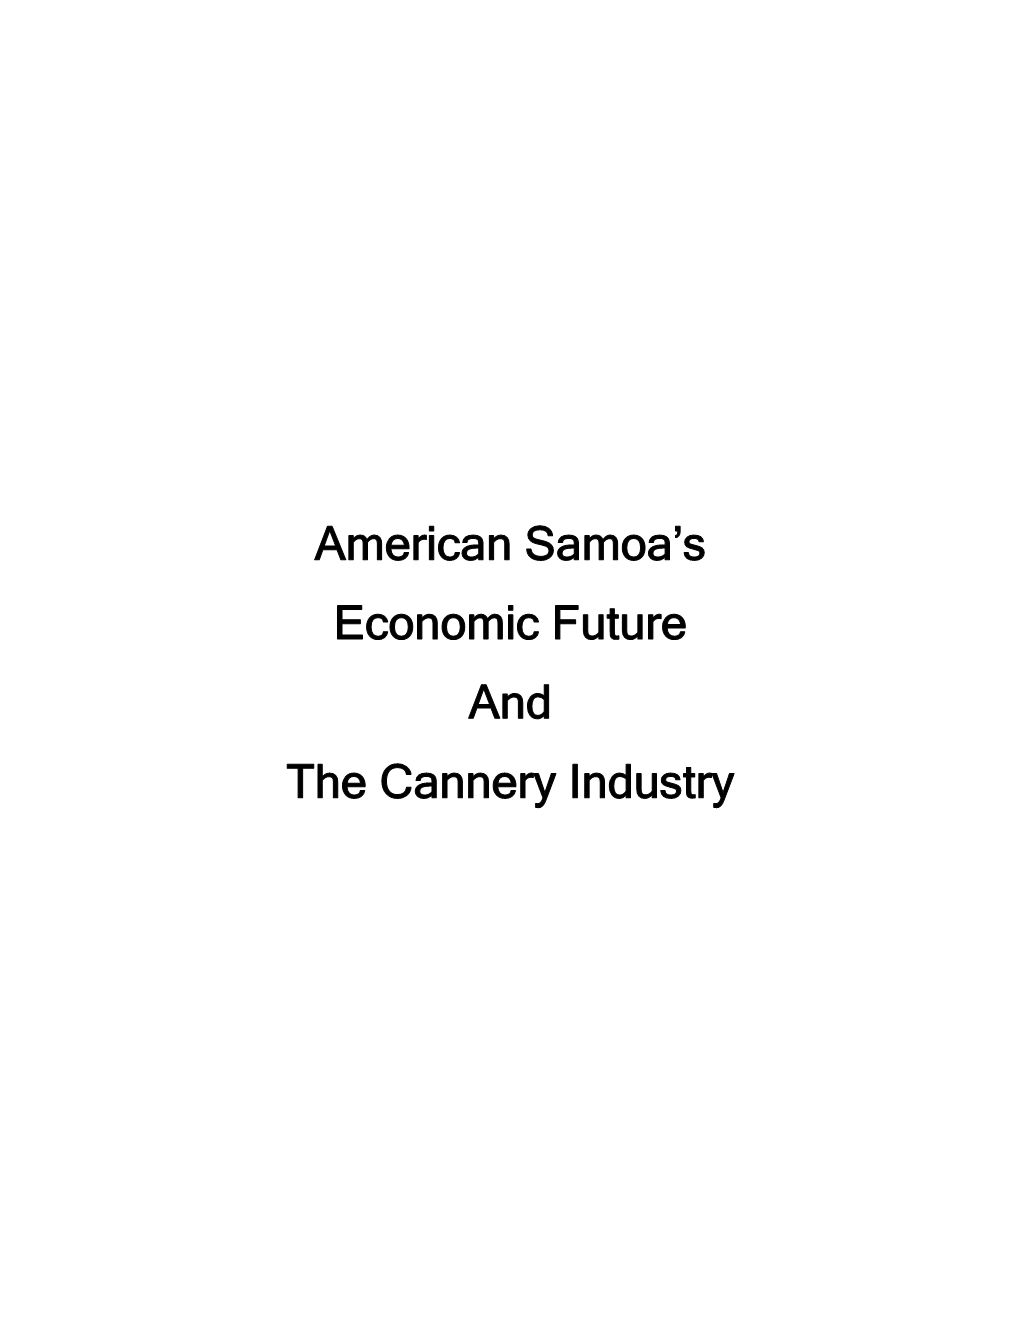 American Samoa's Economic Future and the Cannery Industry